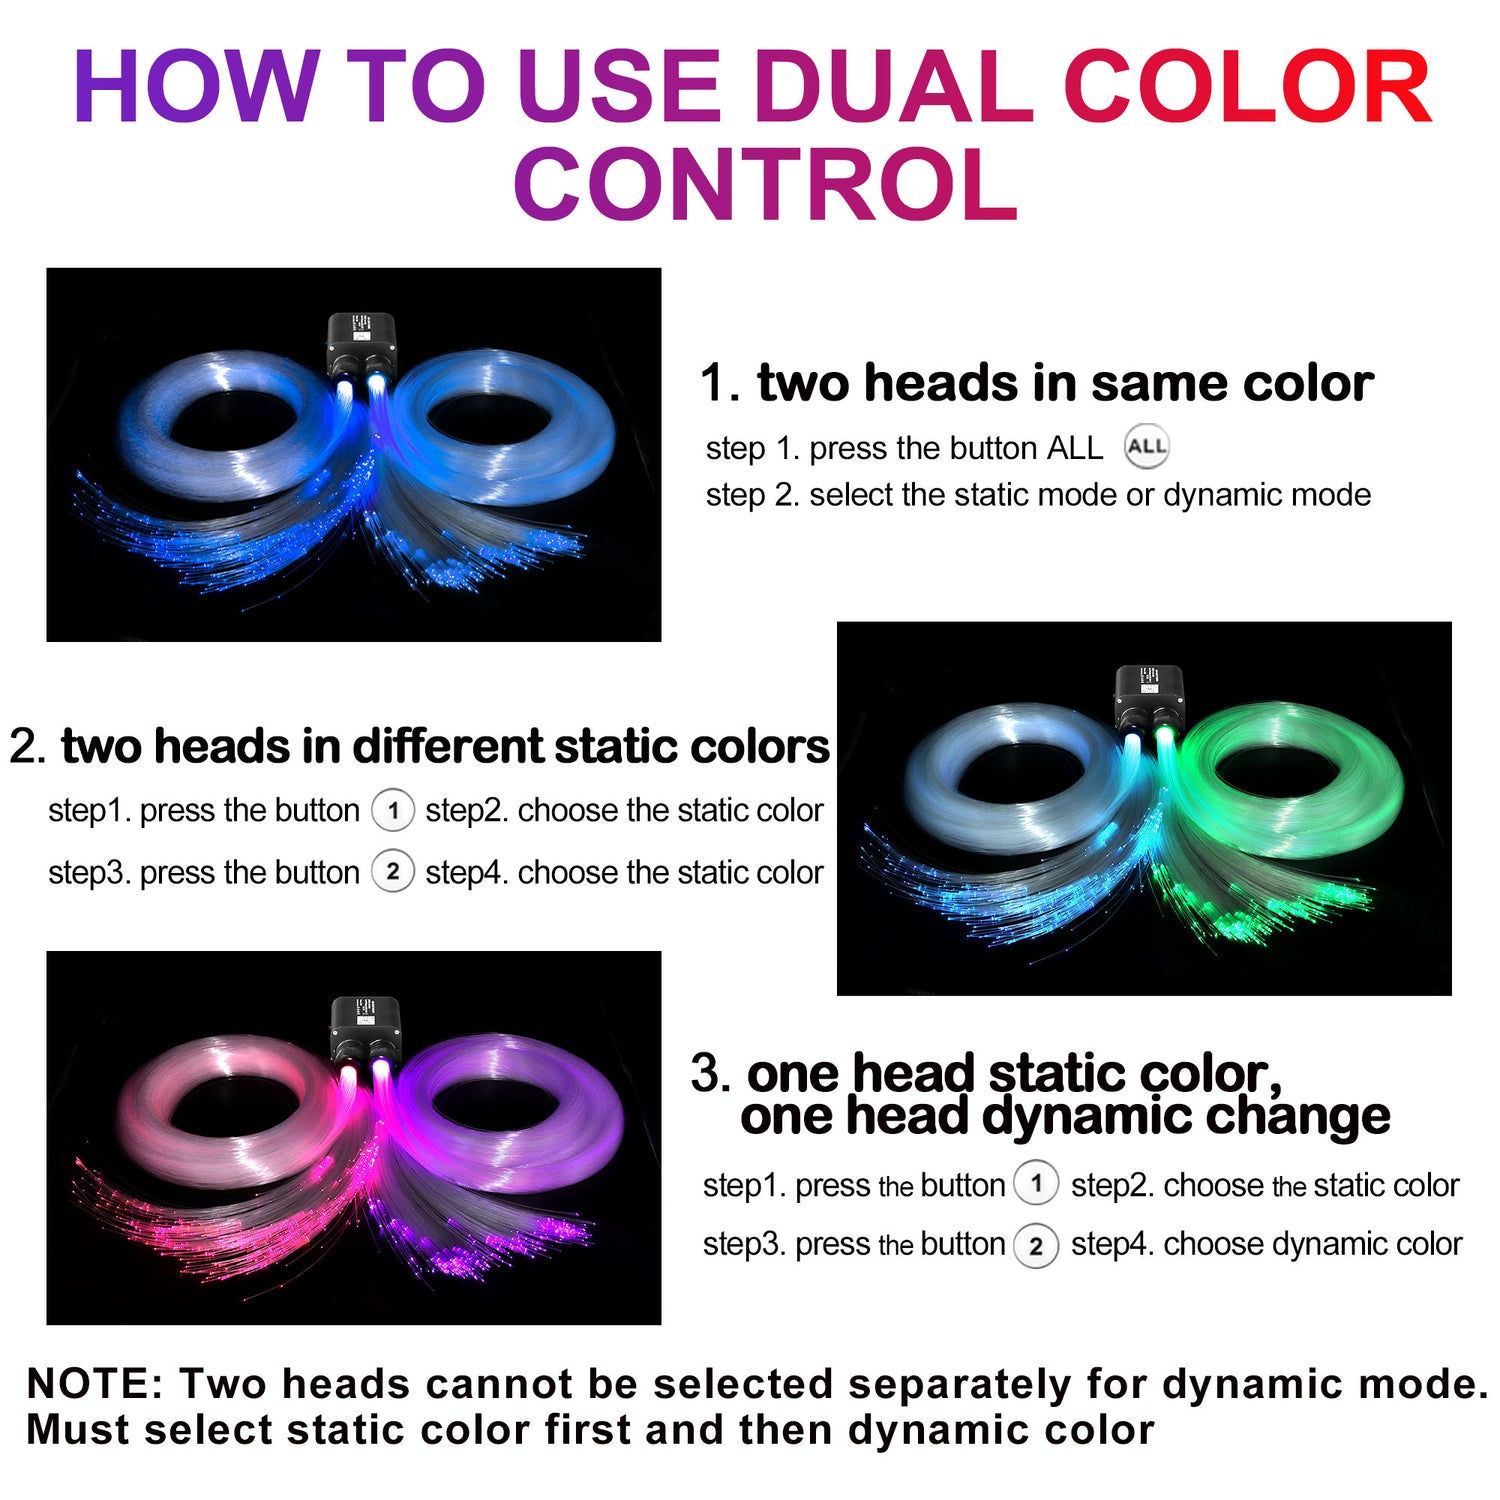 How to use dual color control